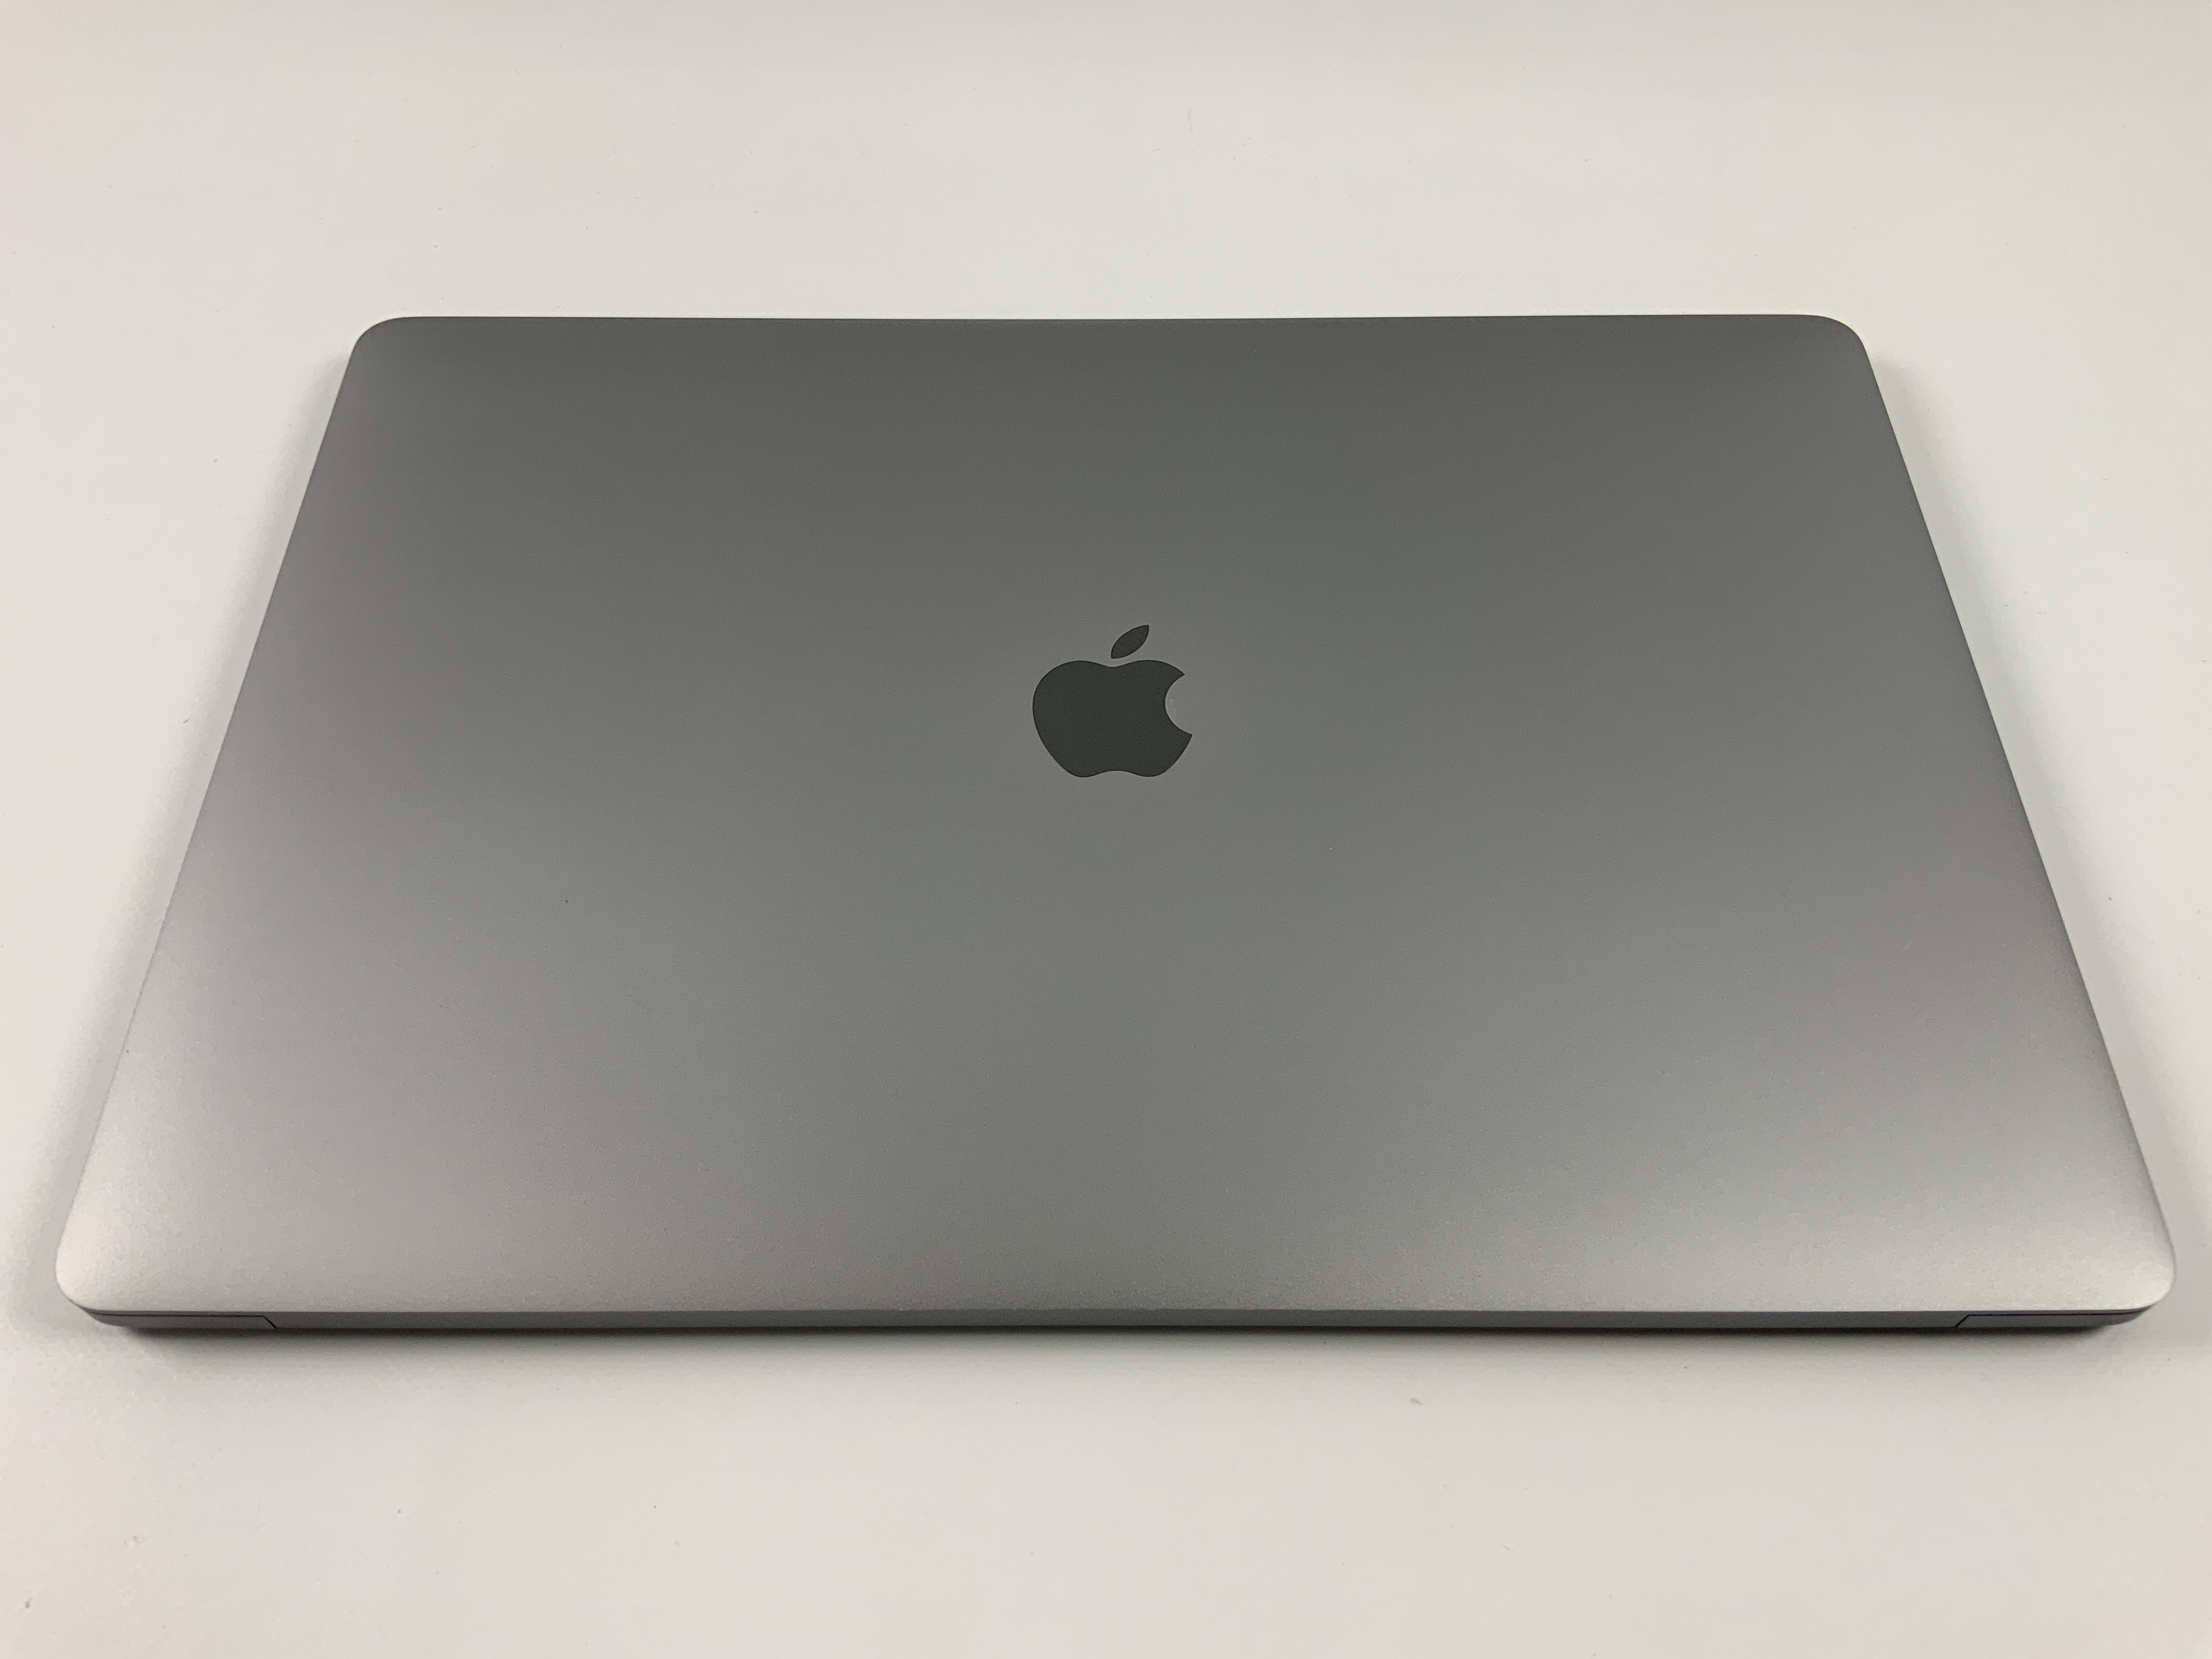 MacBook Pro 15" Touch Bar Mid 2018 (Intel 6-Core i7 2.2 GHz 16 GB RAM 256 GB SSD), Space Gray, Intel 6-Core i7 2.2 GHz, 16 GB RAM, 256 GB SSD, Afbeelding 2